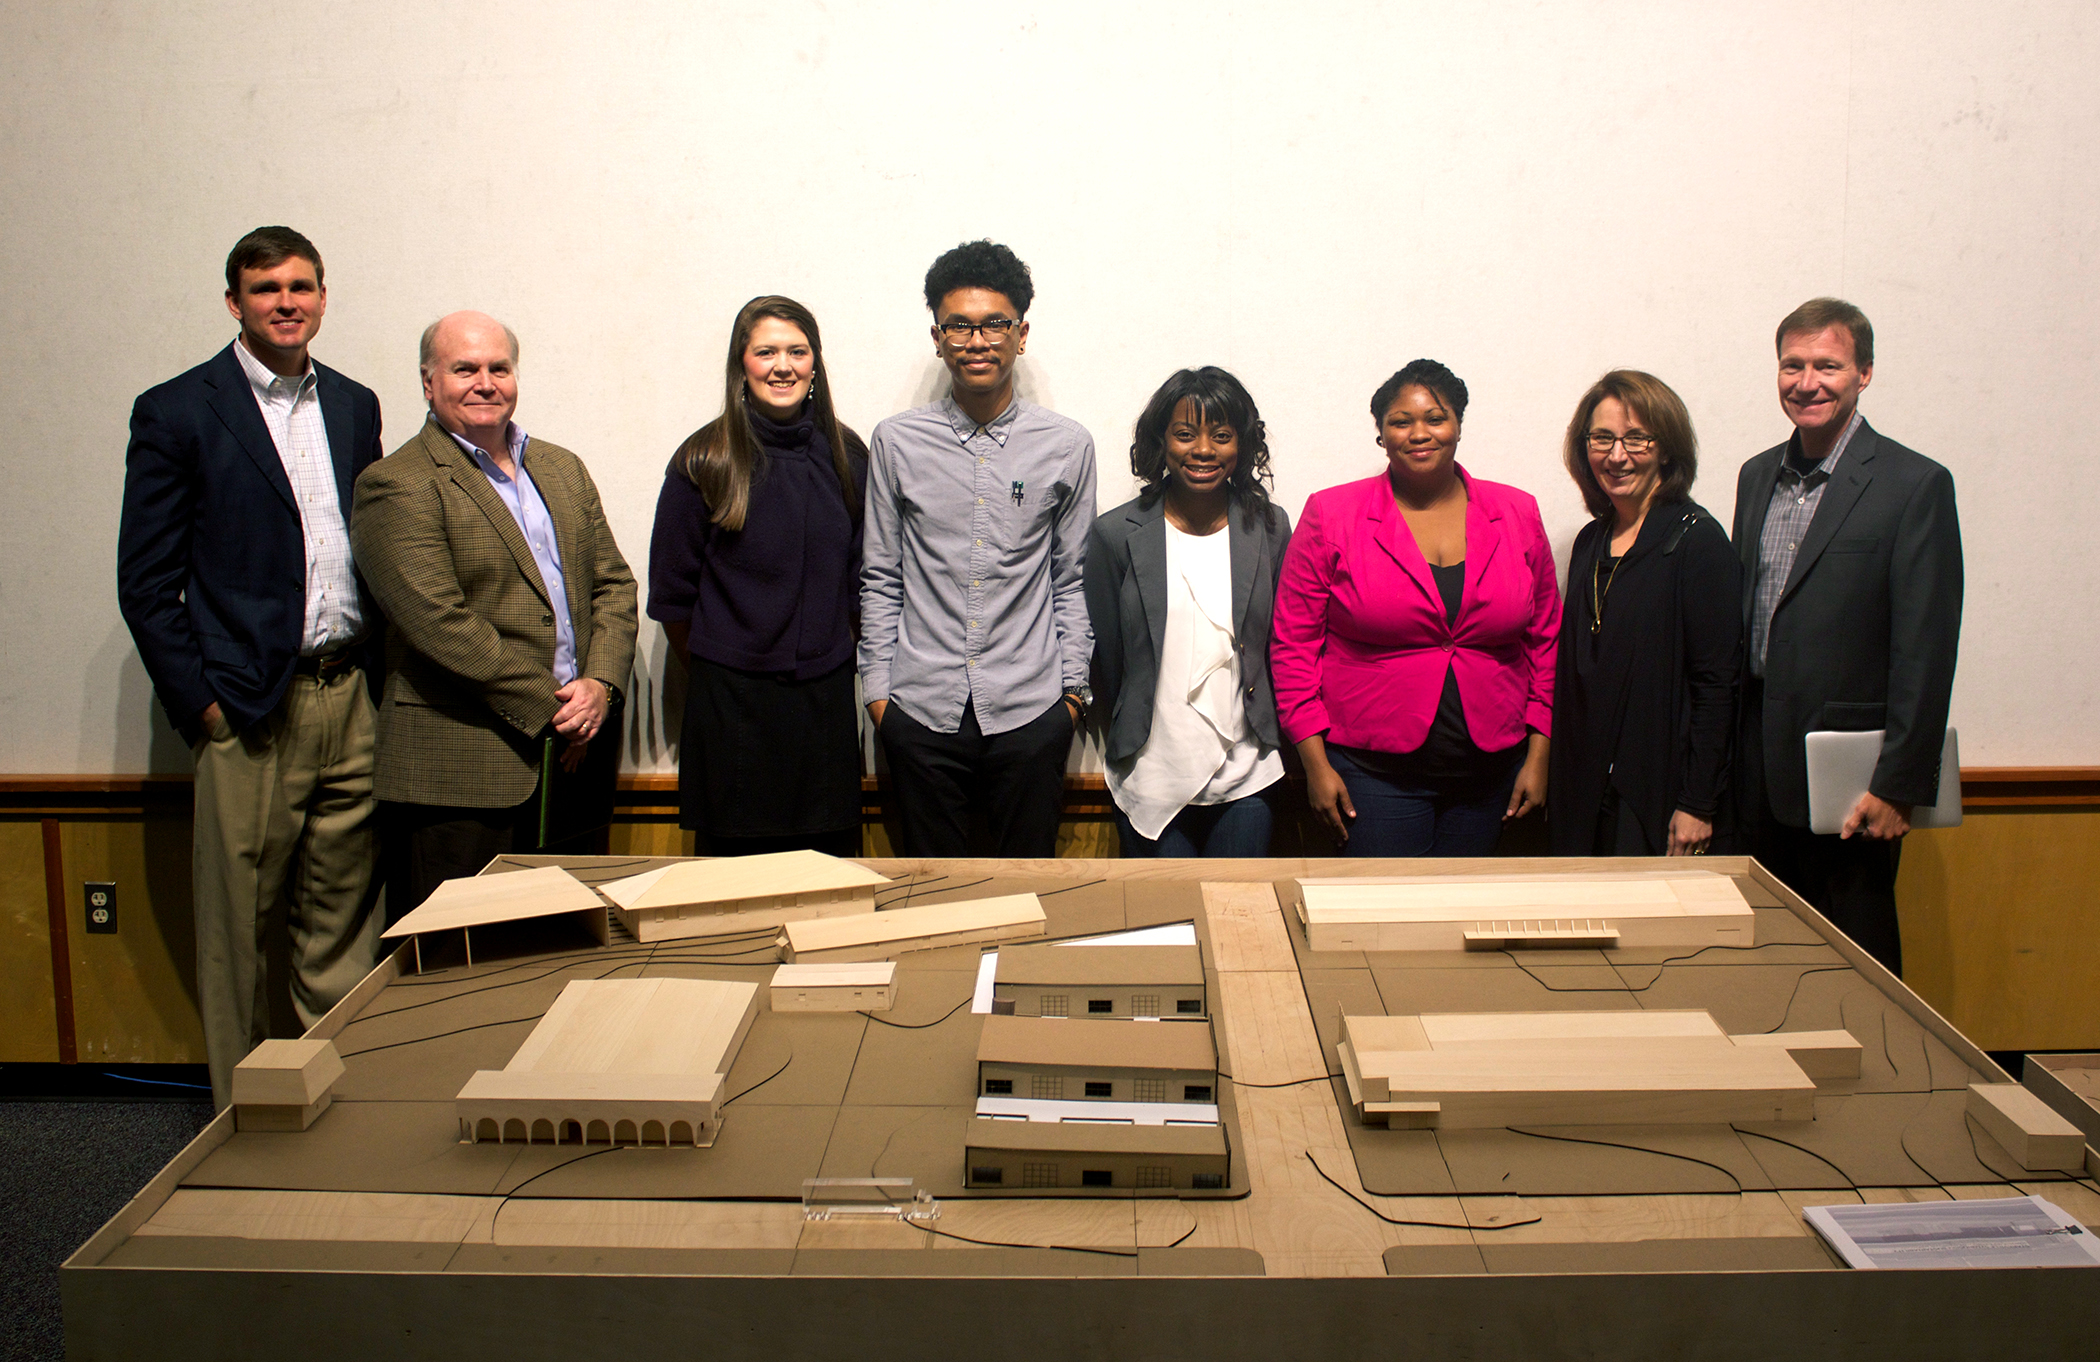 A studio class of fourth-year architectures majors at MSU recently developed ideas for a recycle-reuse process known as functional symbiosis. Among winners were (third from left to right) Megan Vansant, Kevin Flores, Aryn Phillips and Nenyatta Smith. Also pictured are (far left) project juror Patrick Sullivan and former MSU architecture major Keith Findley. With them are (at far right) juror Daria Pizzetta of H3 Hardy Collaboration and architect Jim Findley, an MSU alumnus.